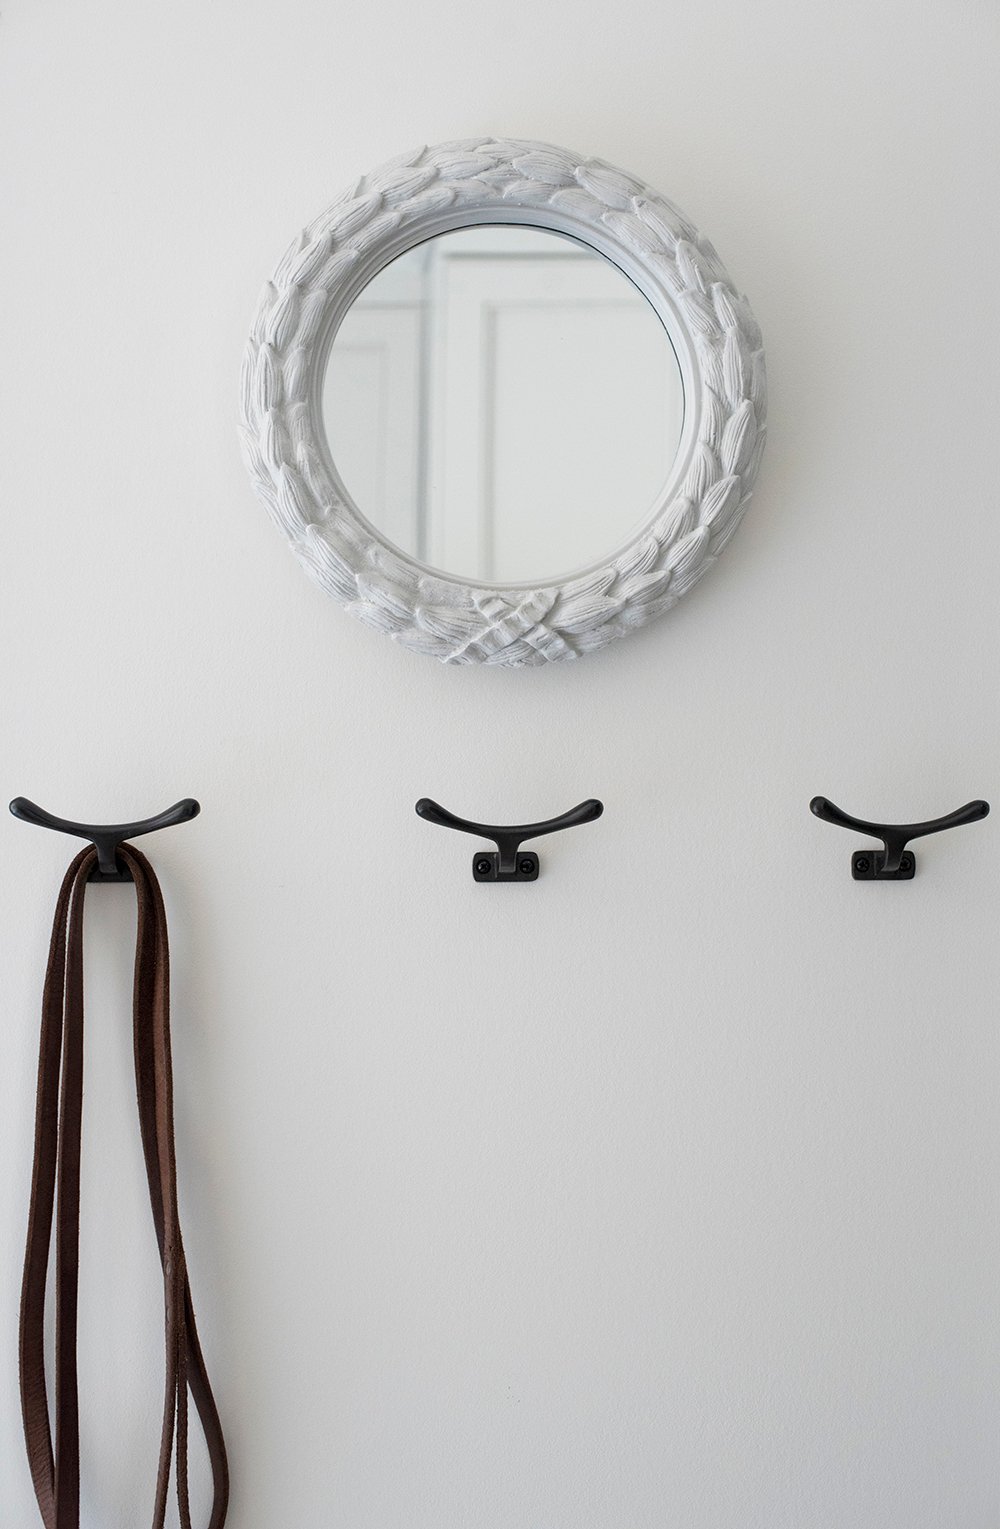 Amazon Finds : Wall Mirrors - roomfortuesday.com